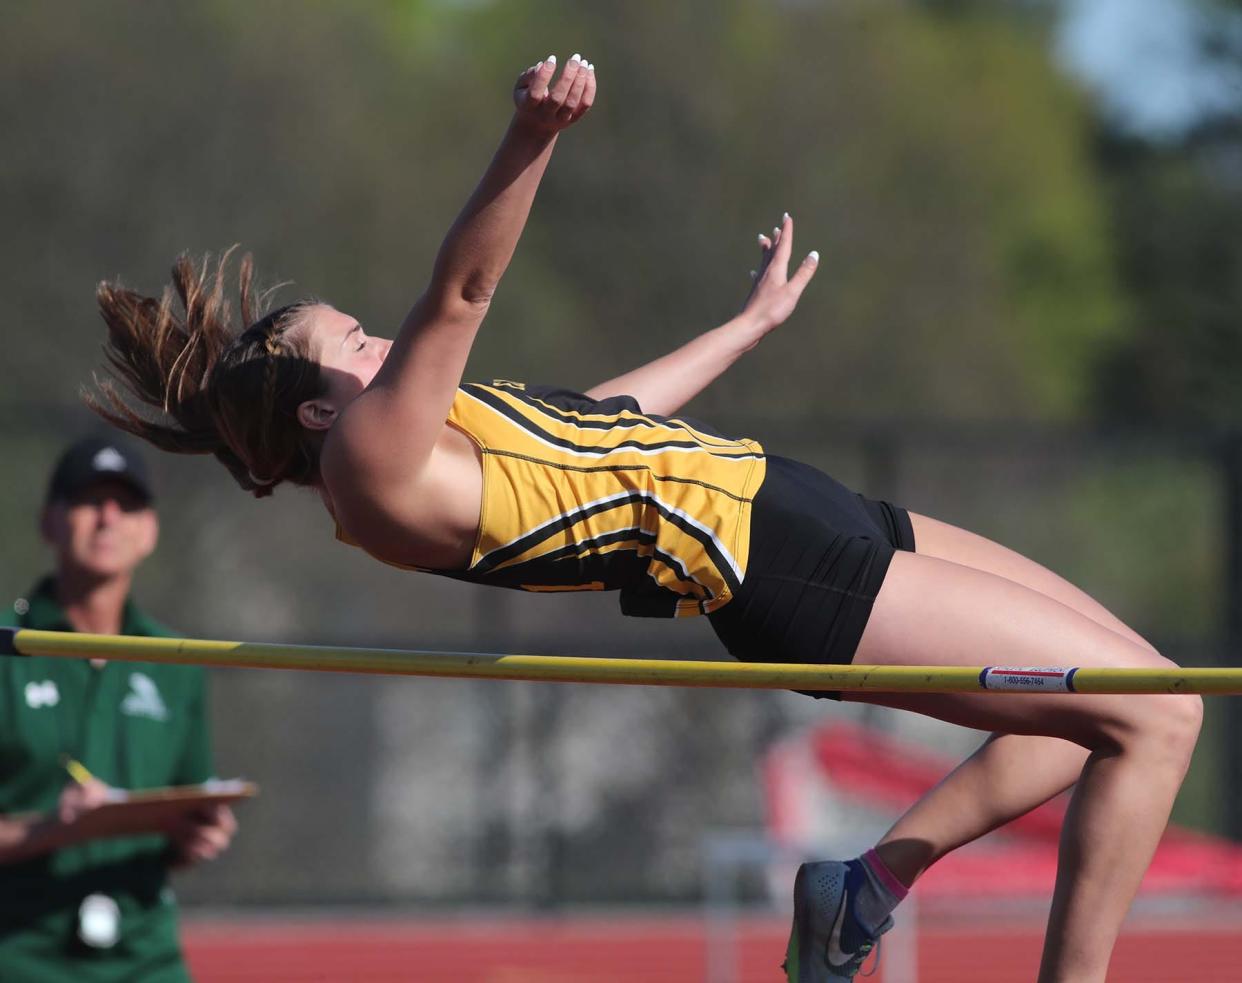 Ellie Brustoski of Cuyahoga Falls jumps to a first place finish at the Suburban League American Conference Track Meet at Tallmadge High School in Tallmadge on Monday.